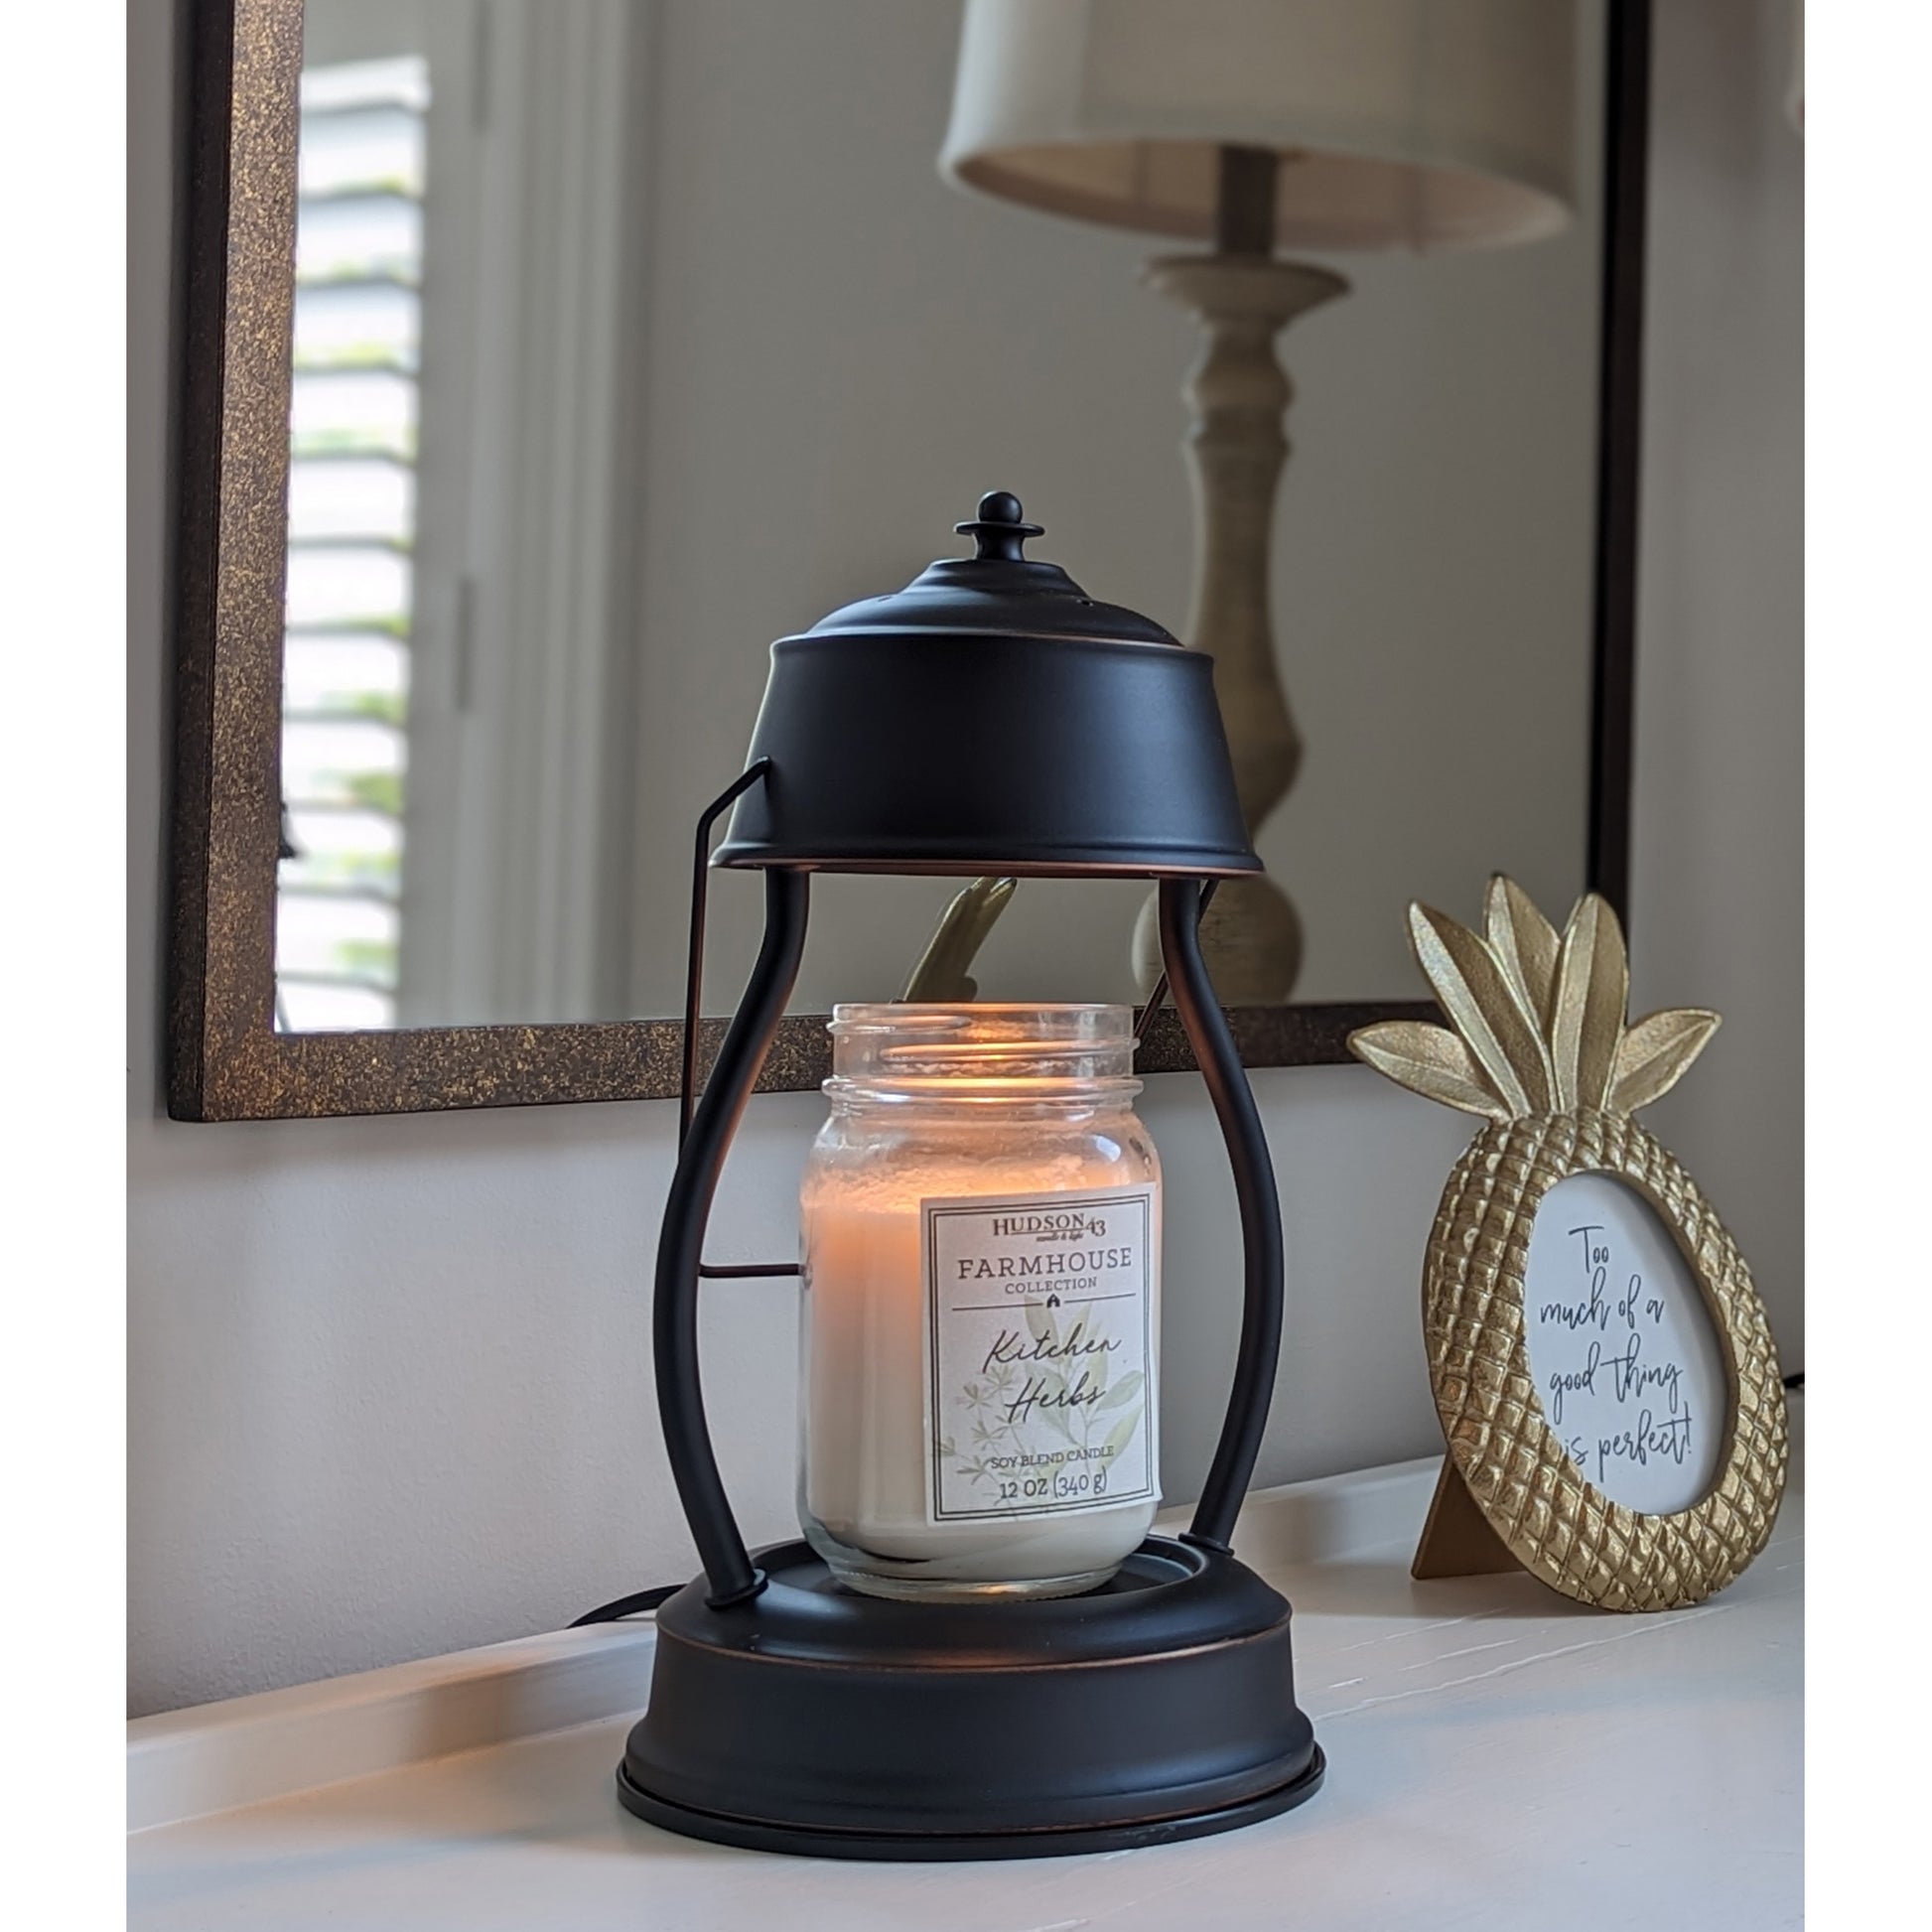 Image, lit rubbed bronze candle warmer with larger mason jar scented candle placed on an entry hall table.